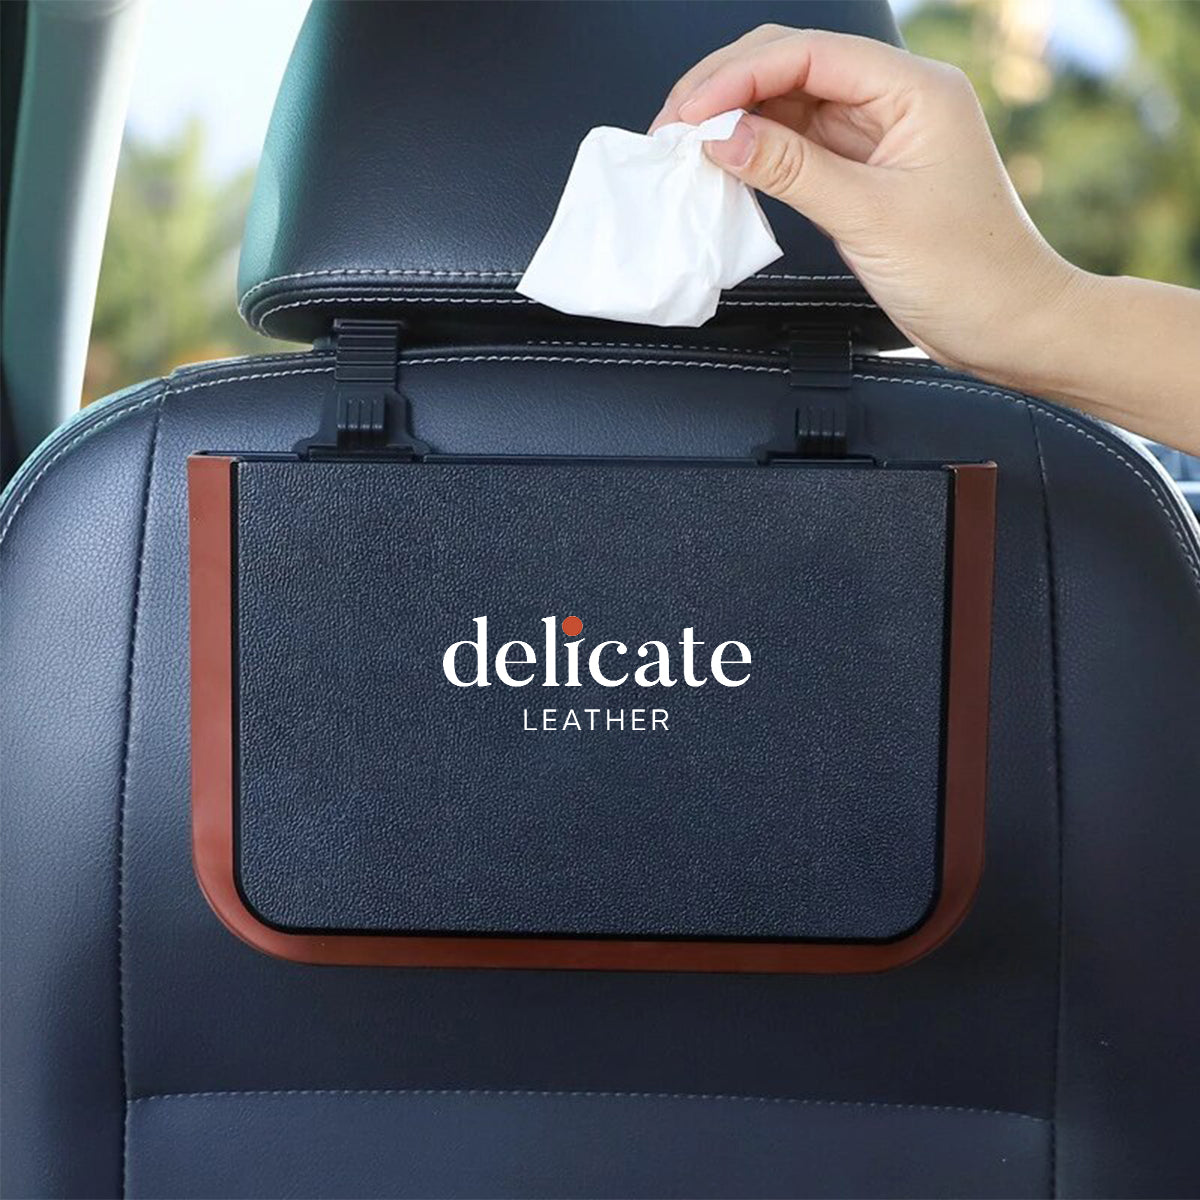 Delicate Leather Hanging Waterproof Car Trash can-Foldable, Custom For Your Cars, Waterproof, and Equipped with Cup Holders and Trays. Multi-Purpose, Car Accessories WQ11992 - Delicate Leather